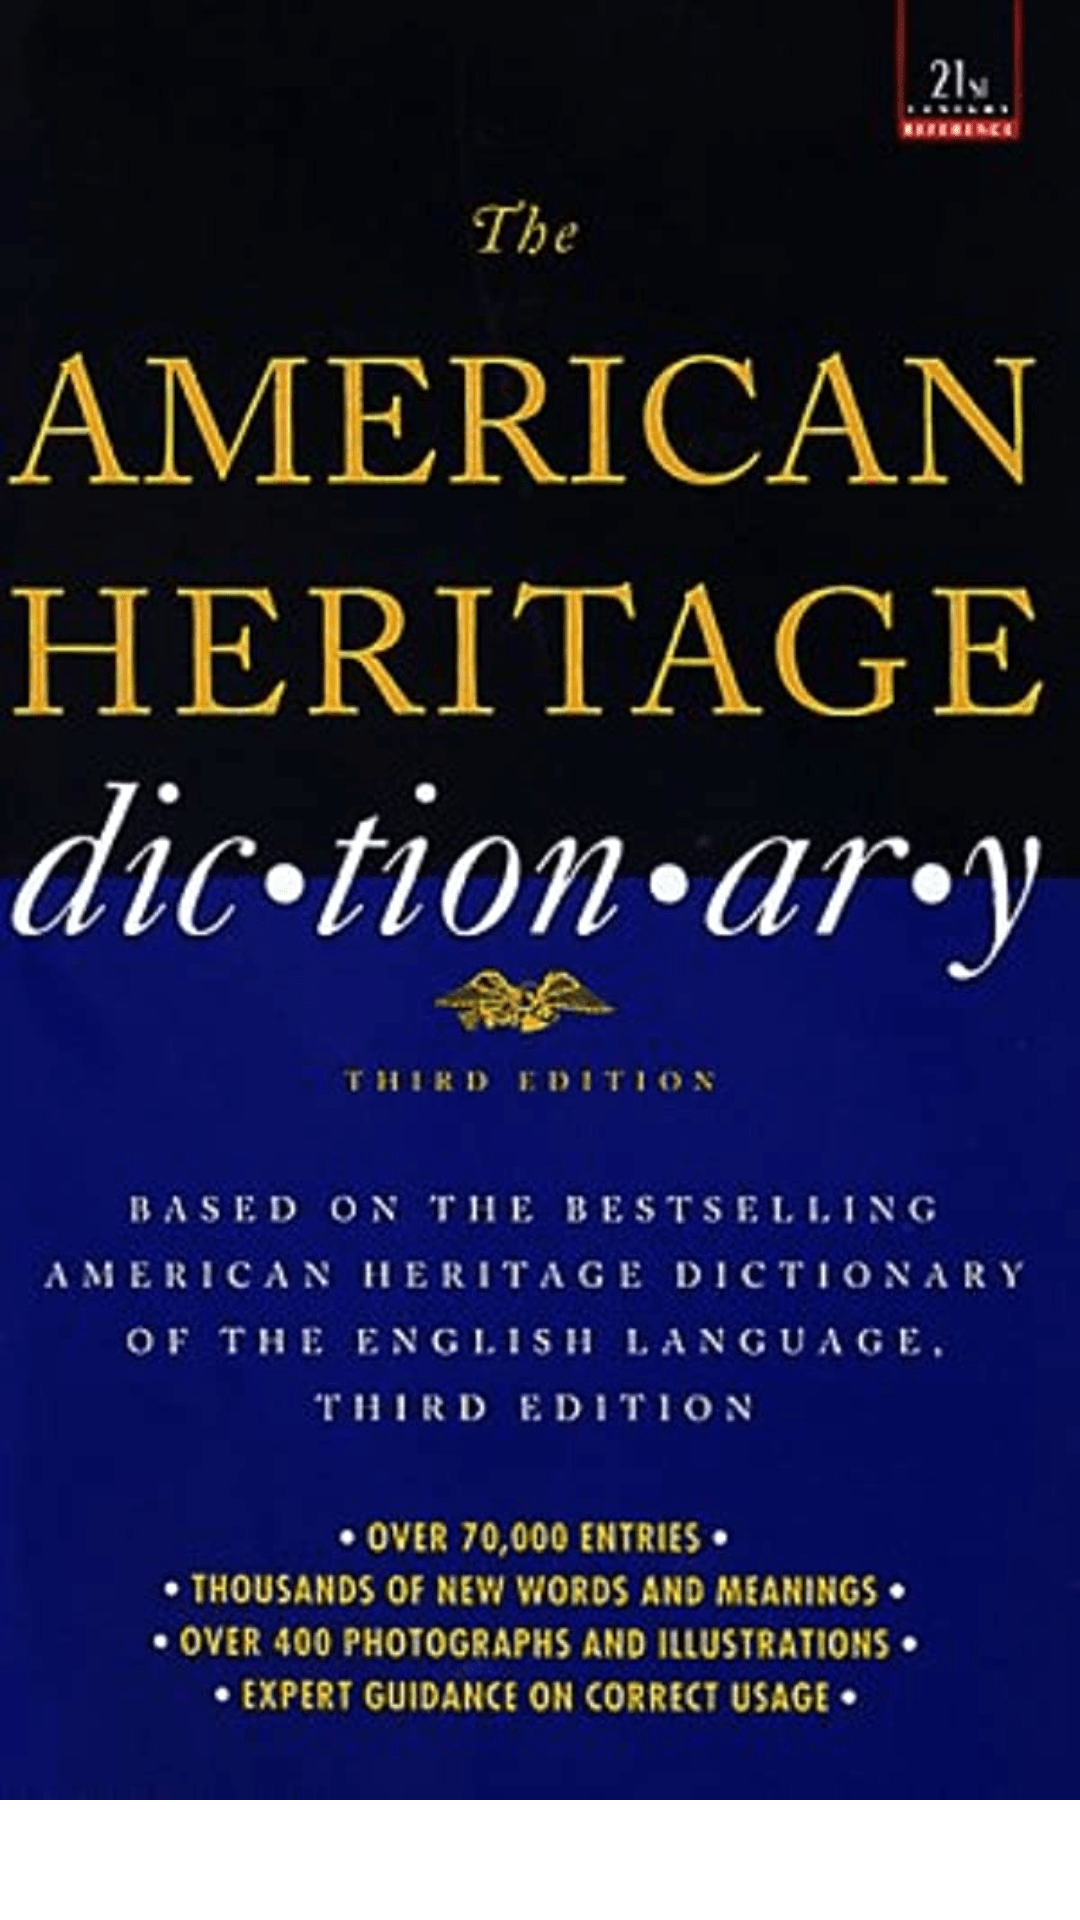 The American Heritage Dictionary: Third Edition